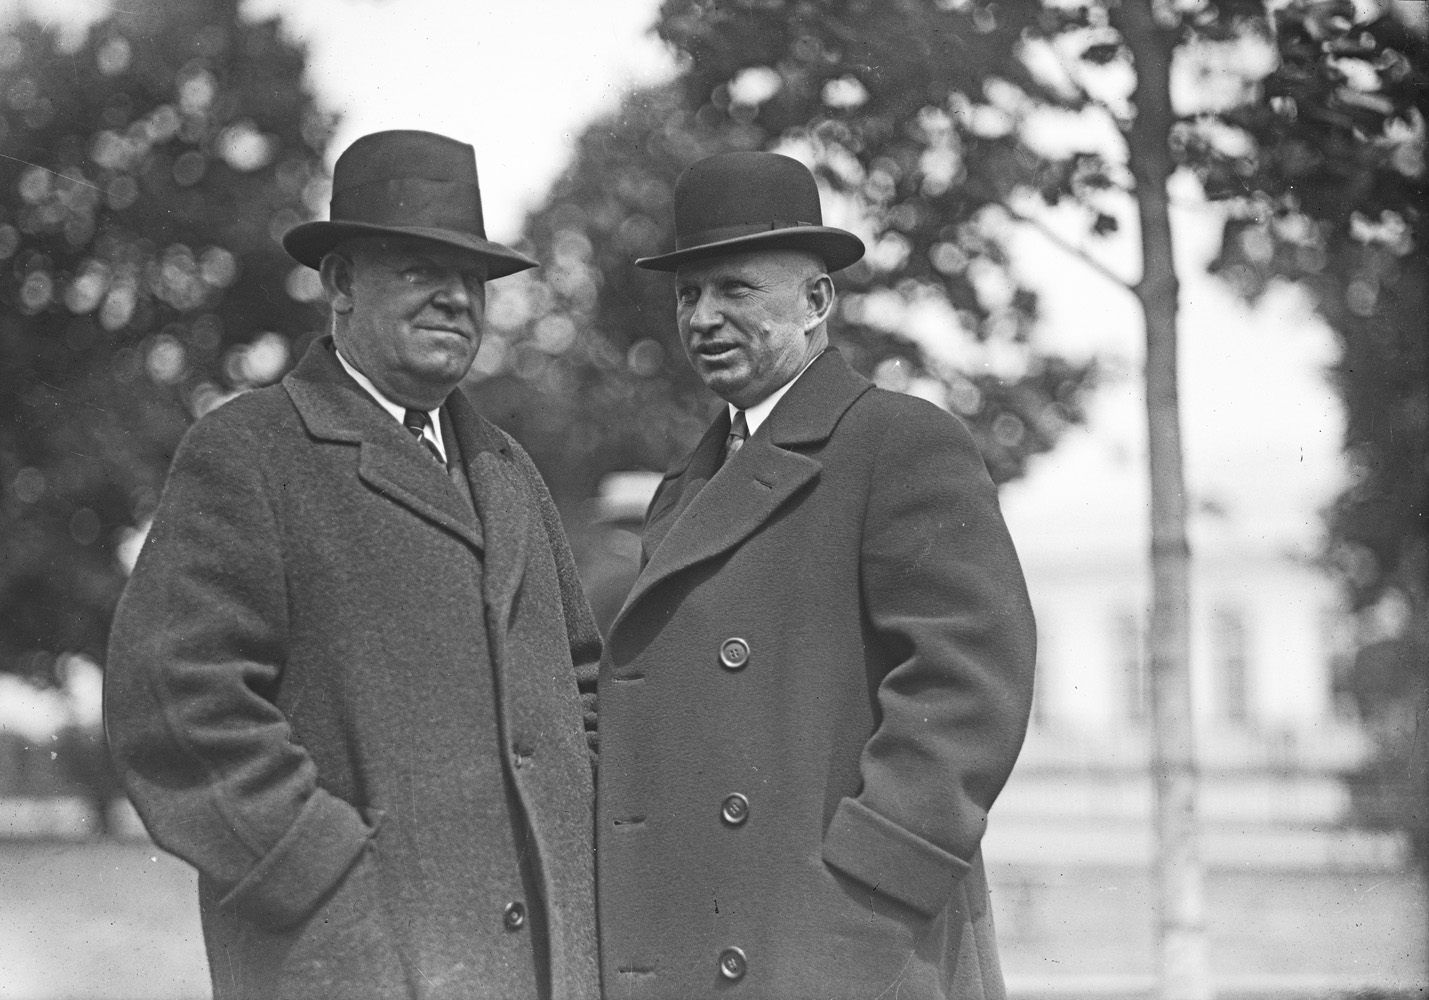 Robert A. Smith and Howard Oots in an undated photograph (Keeneland Library Cook Collection)